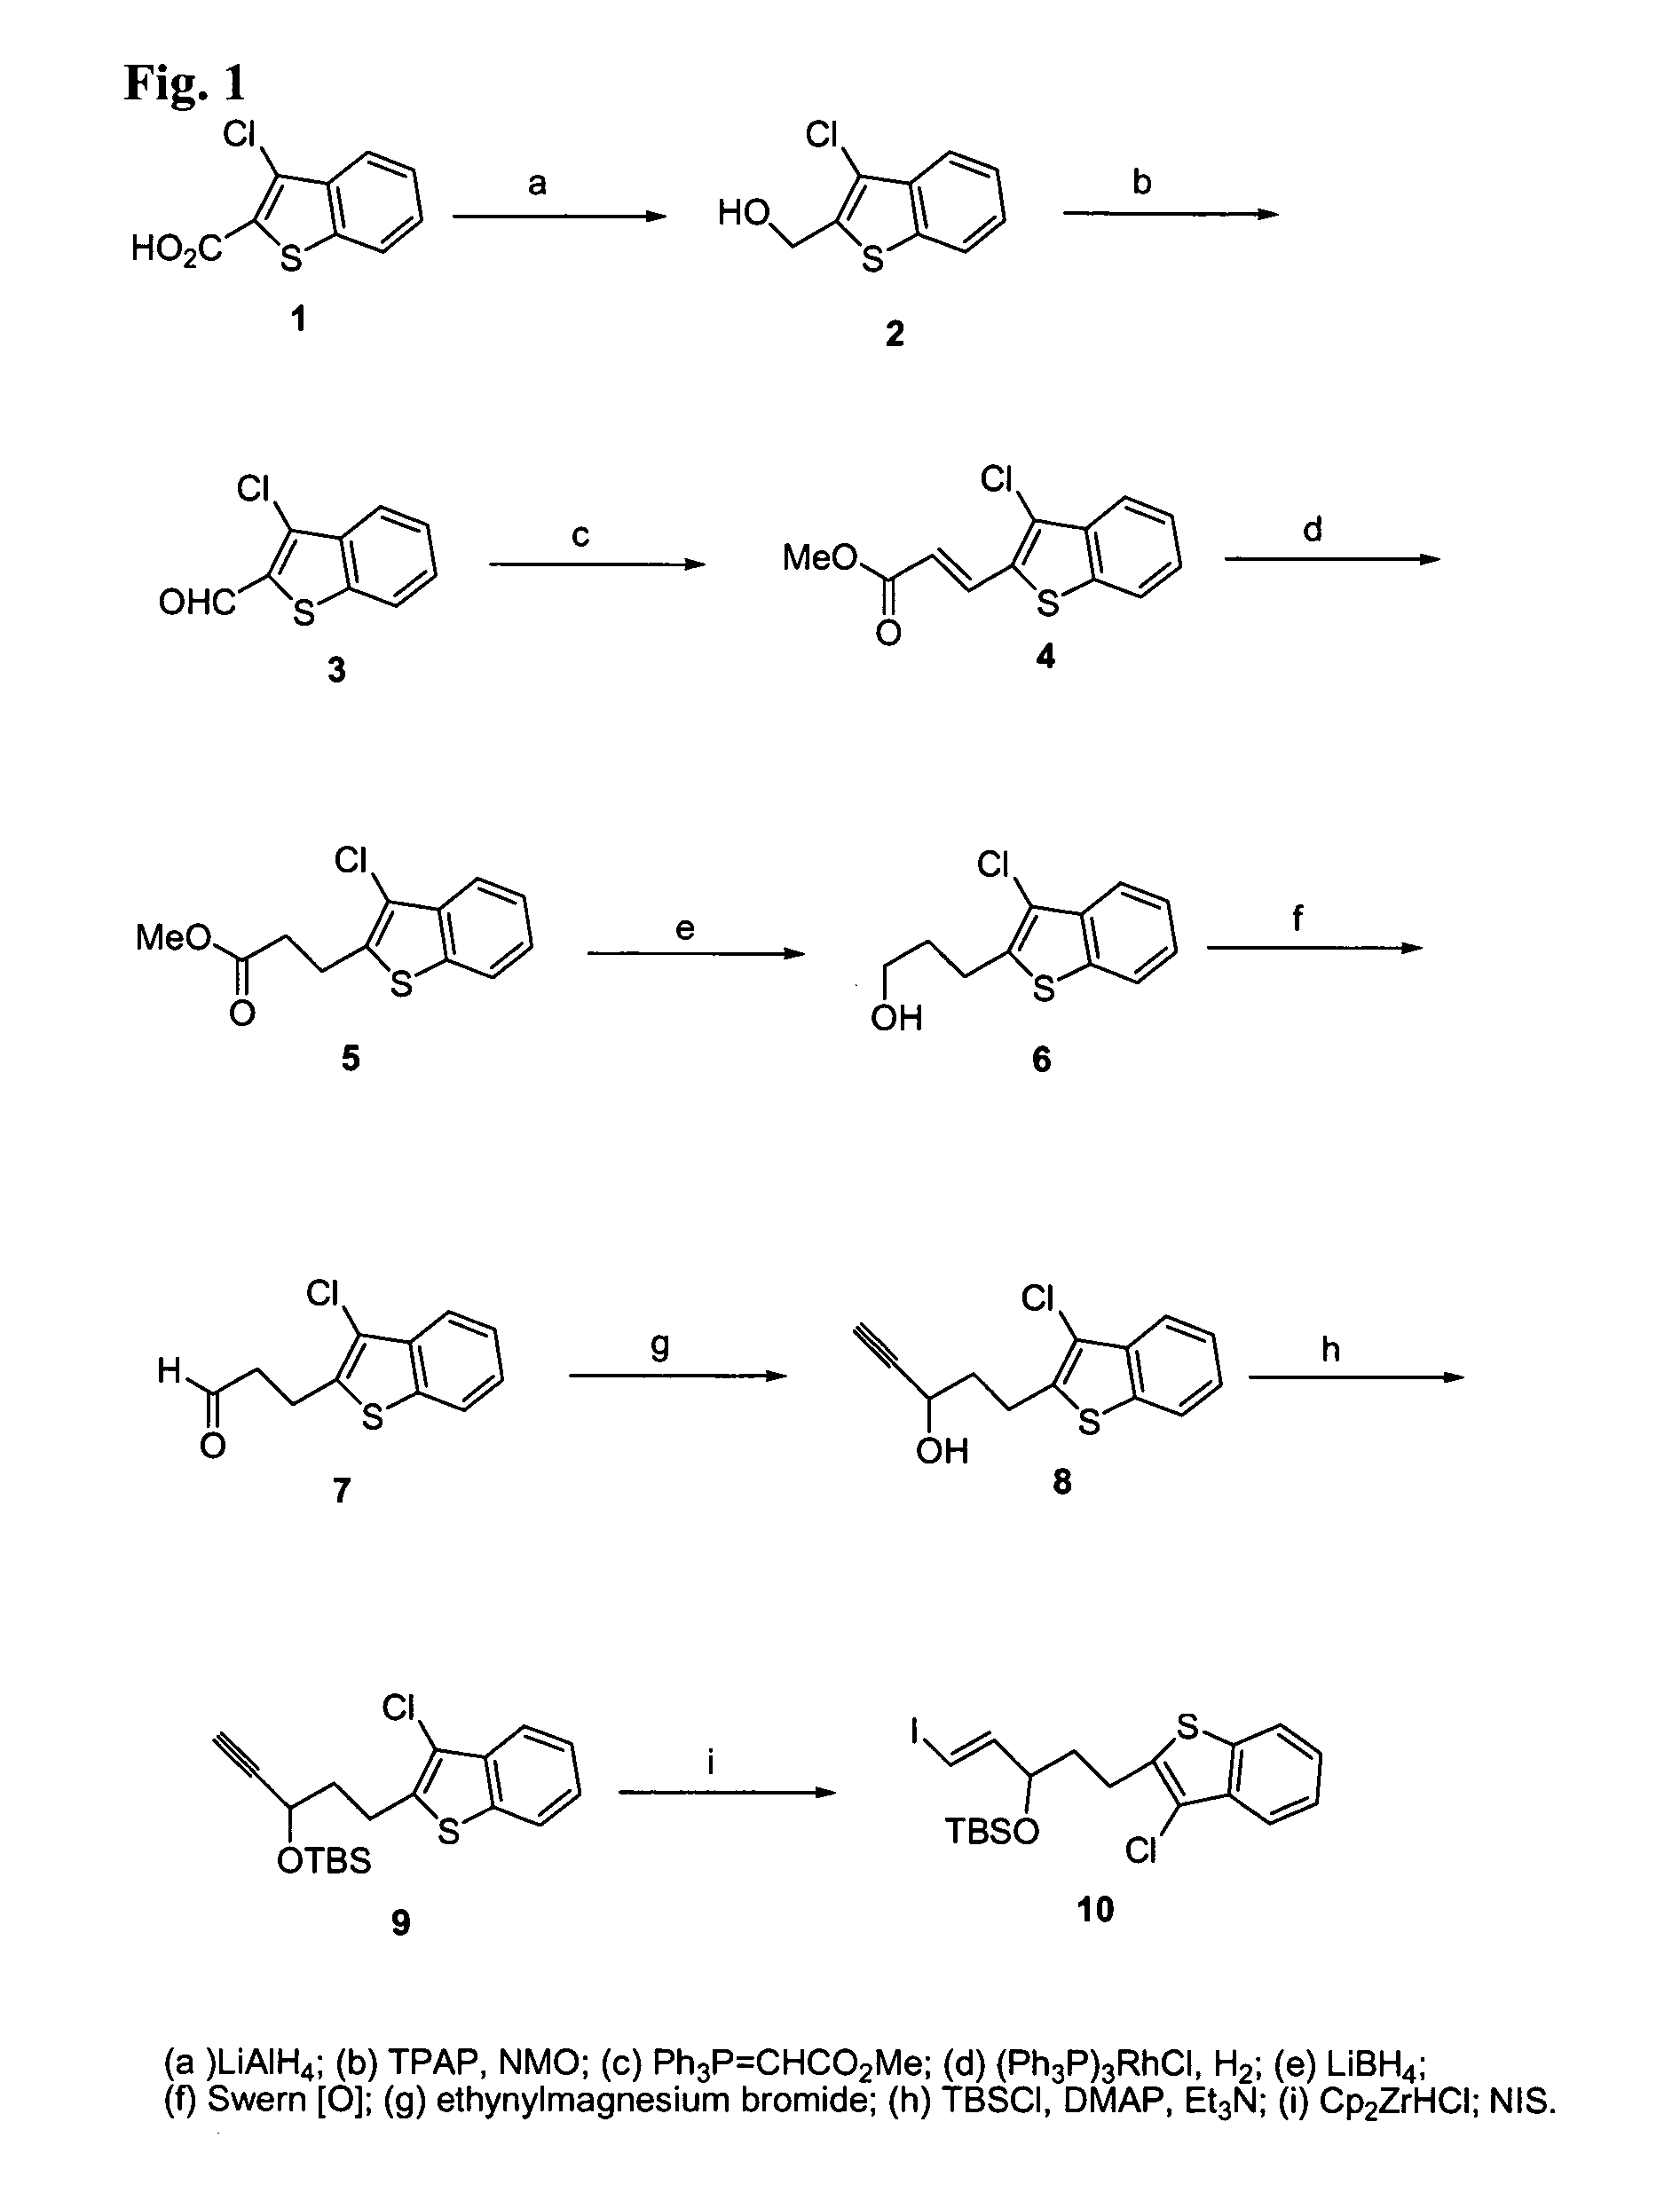 2,3,4-substituted cyclopentanones as therapeutic agents